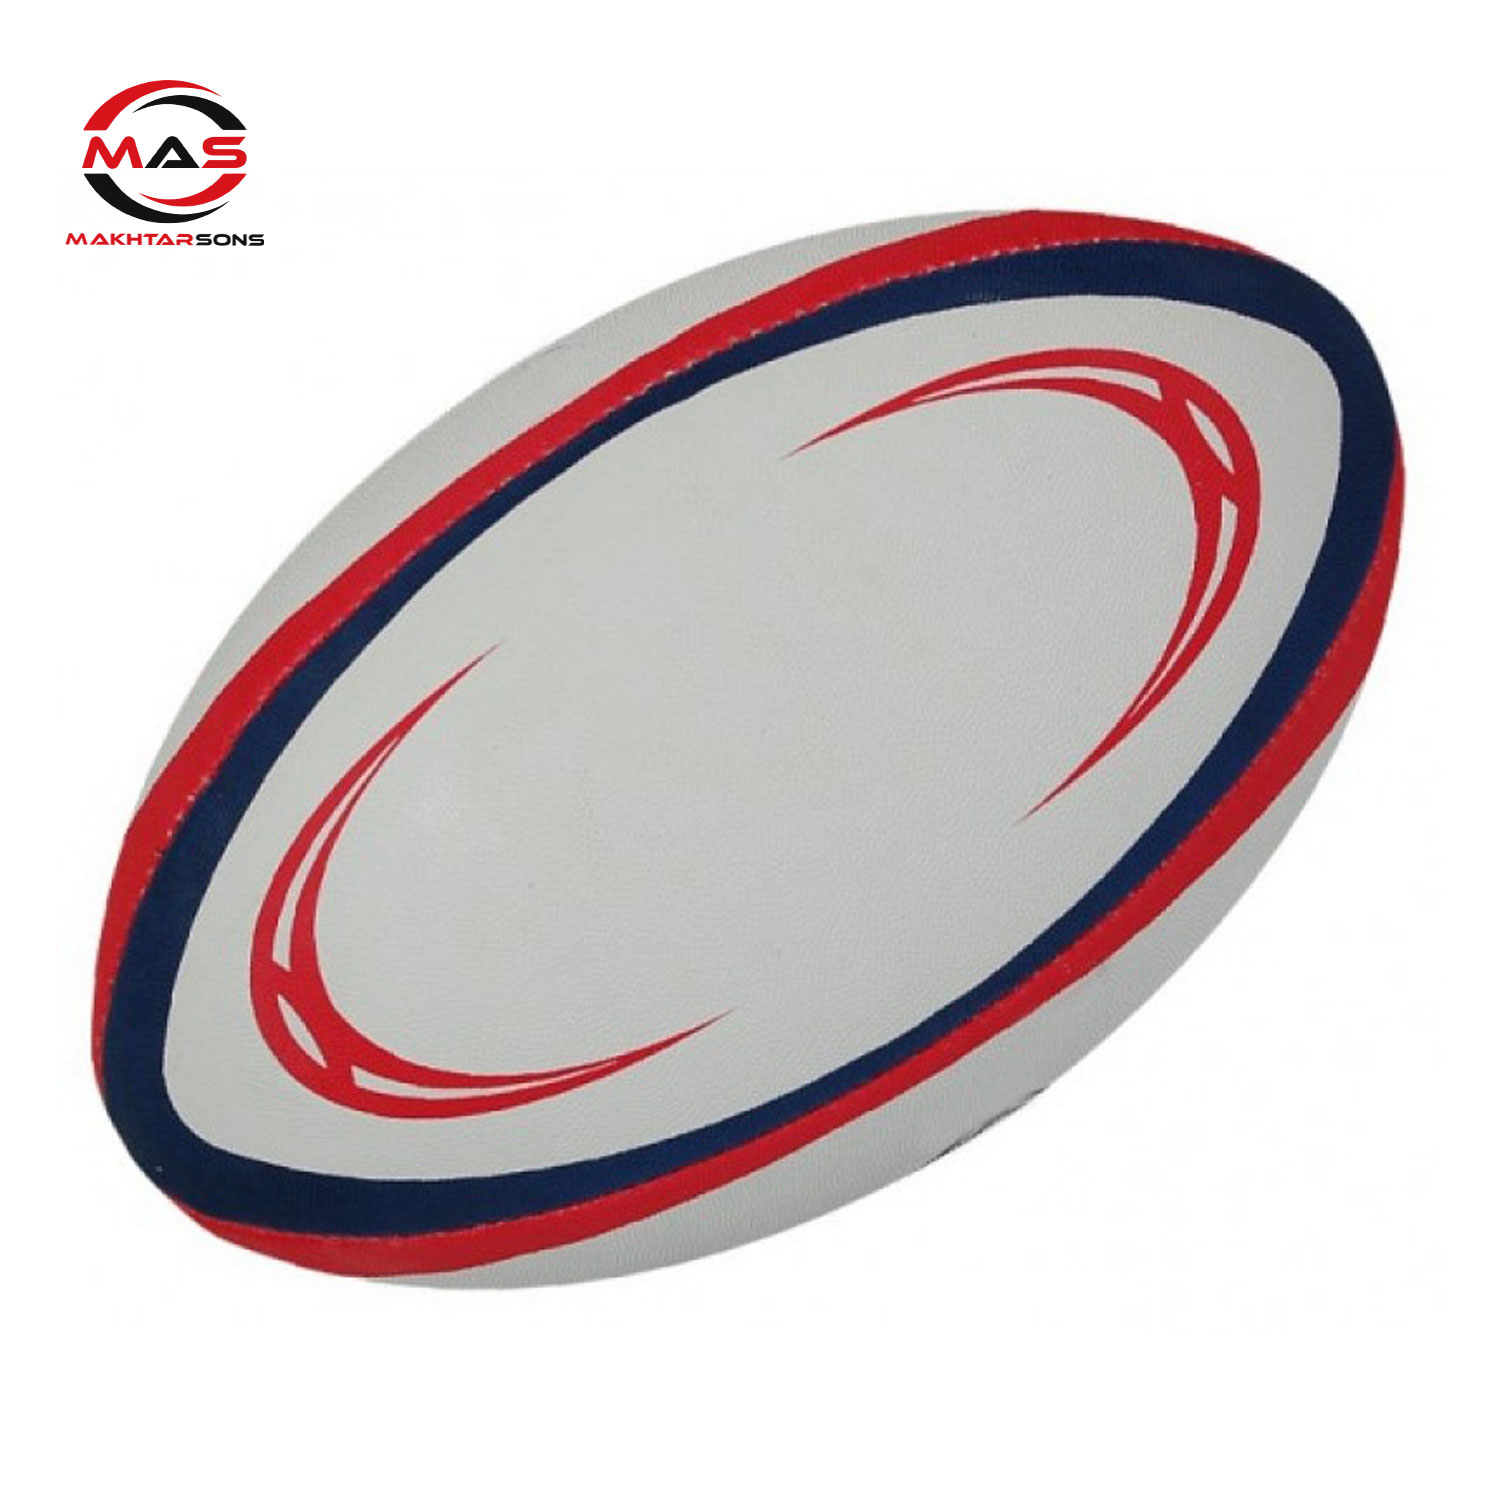 RUGBY BALL | MAS 427